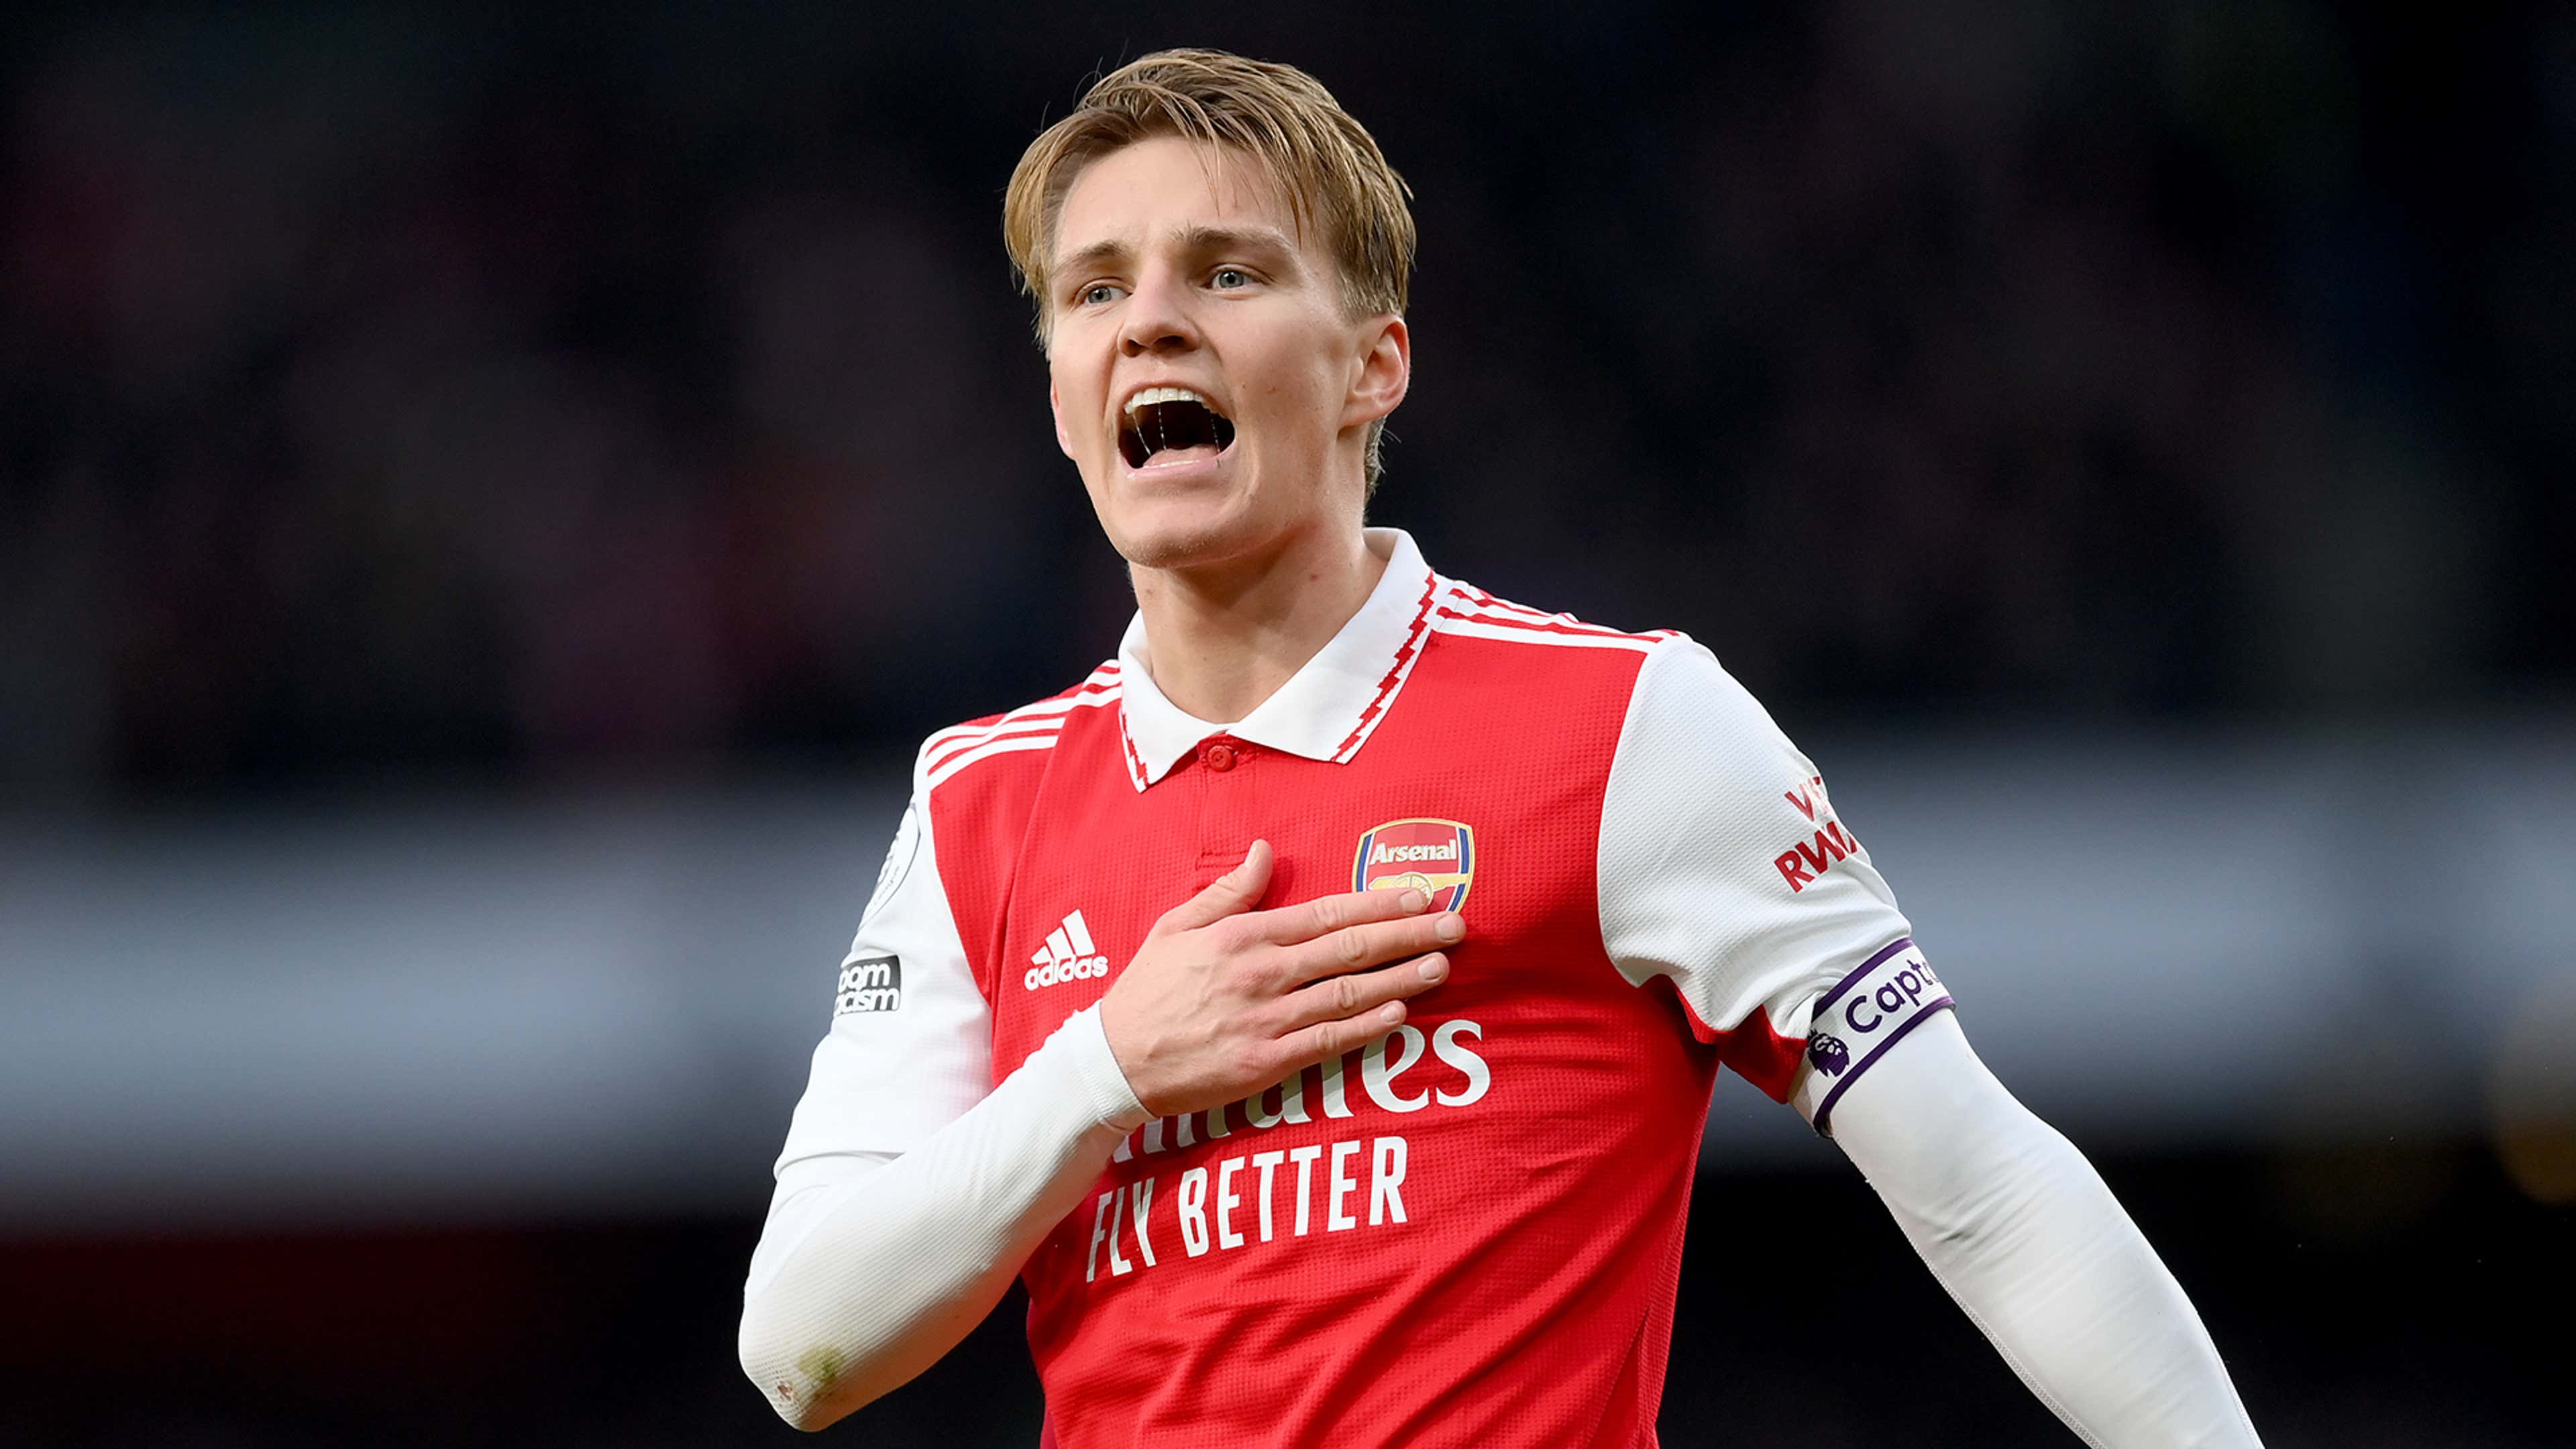 Exceptional' - Pep Guardiola reveals glowing first impression Arsenal captain Martin Odegaard left on him during Bayern Munich trial training session | Goal.com US